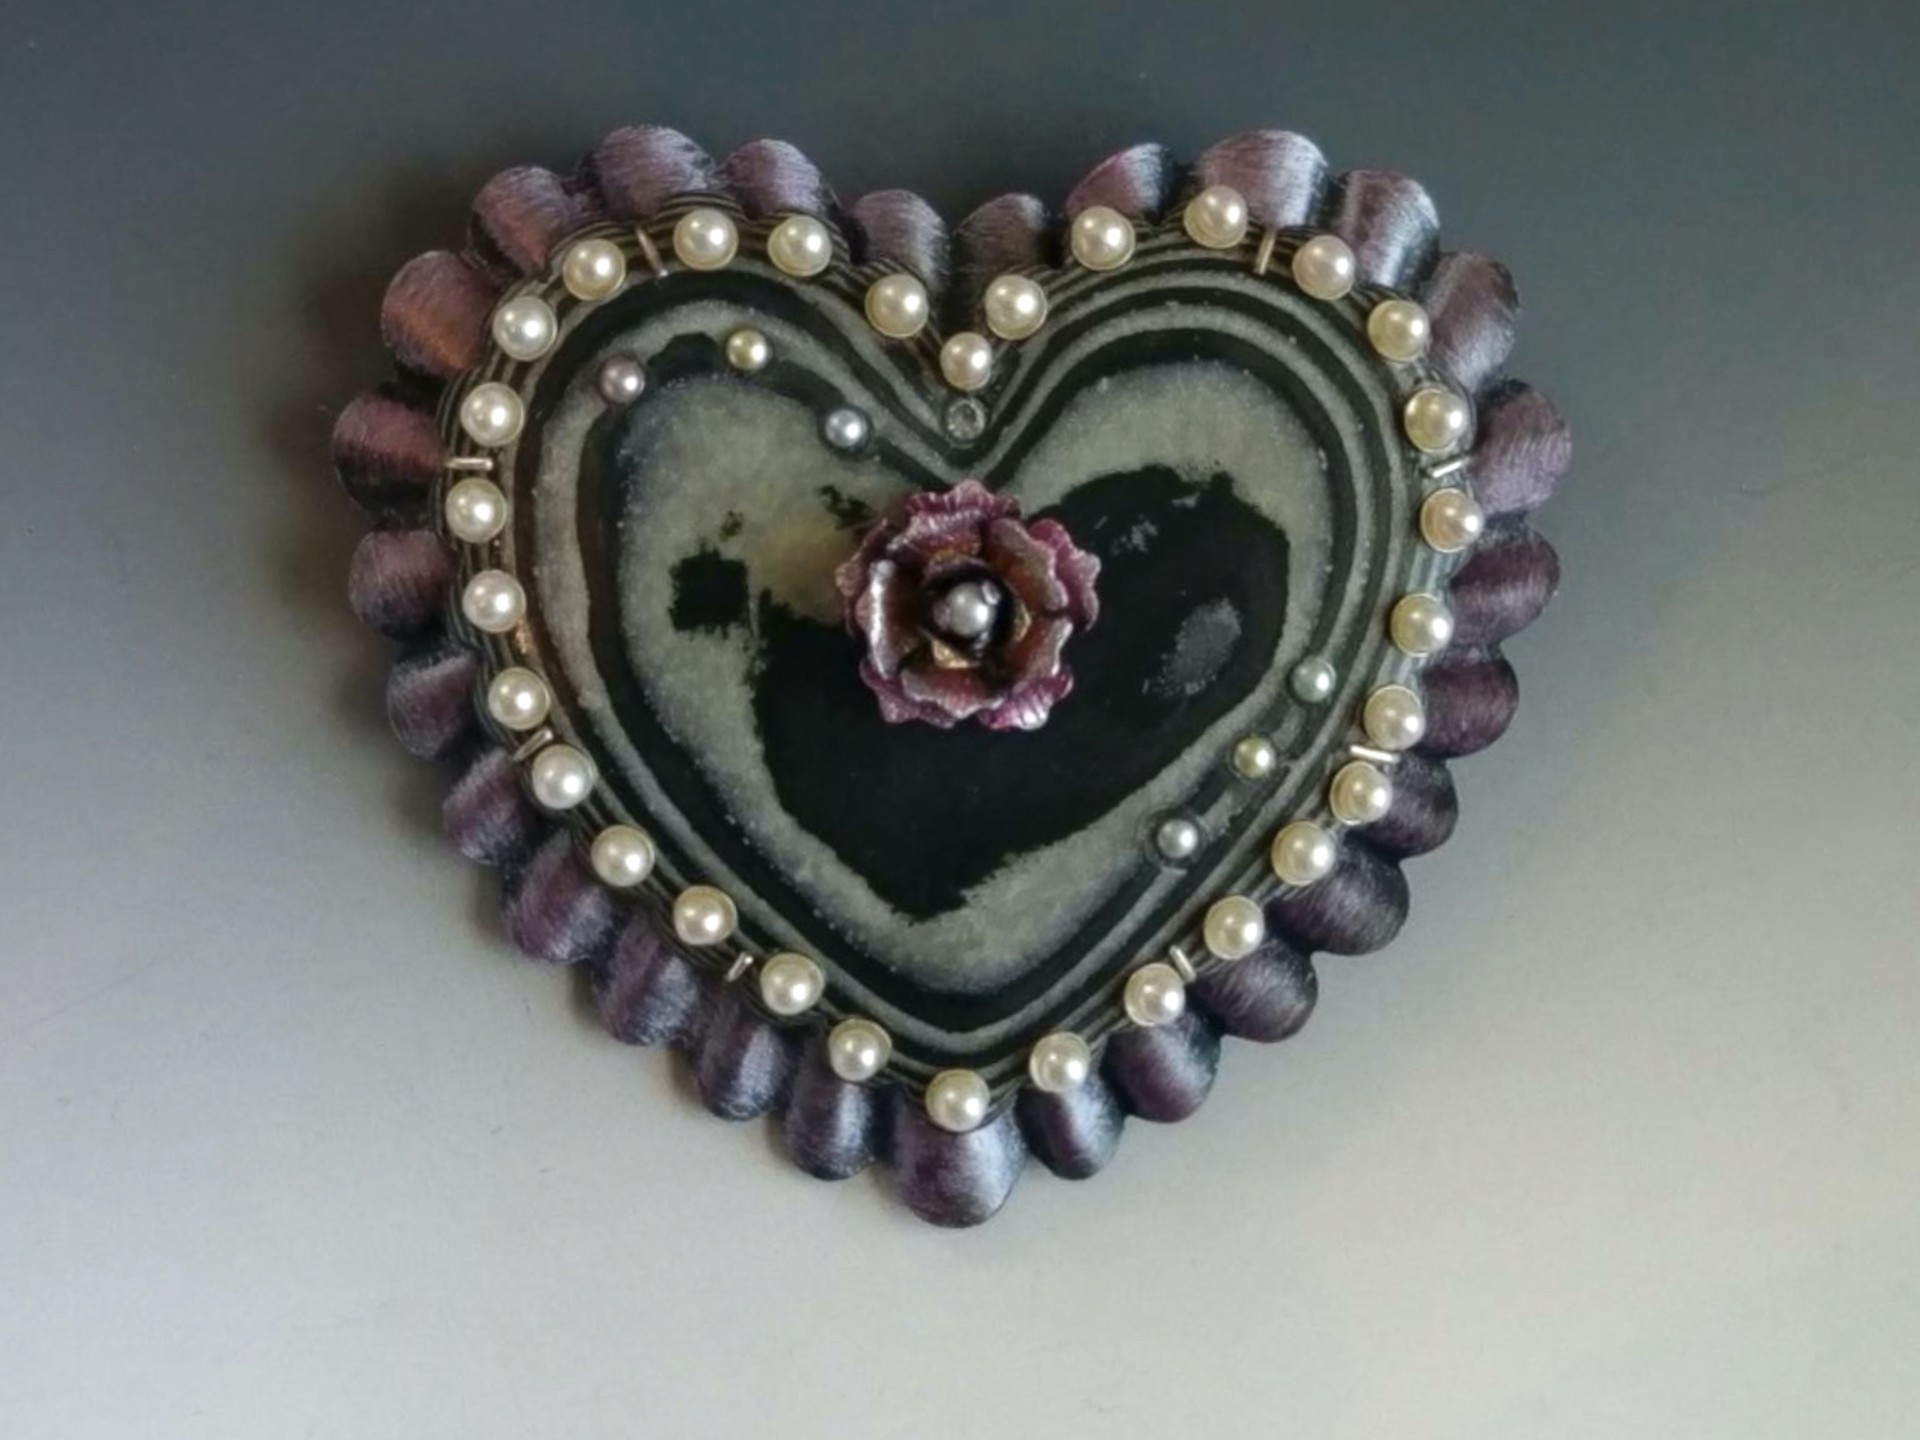 The Only Constant is Change: A Milagro for a Worried Heart (brooch) by Alison Pack